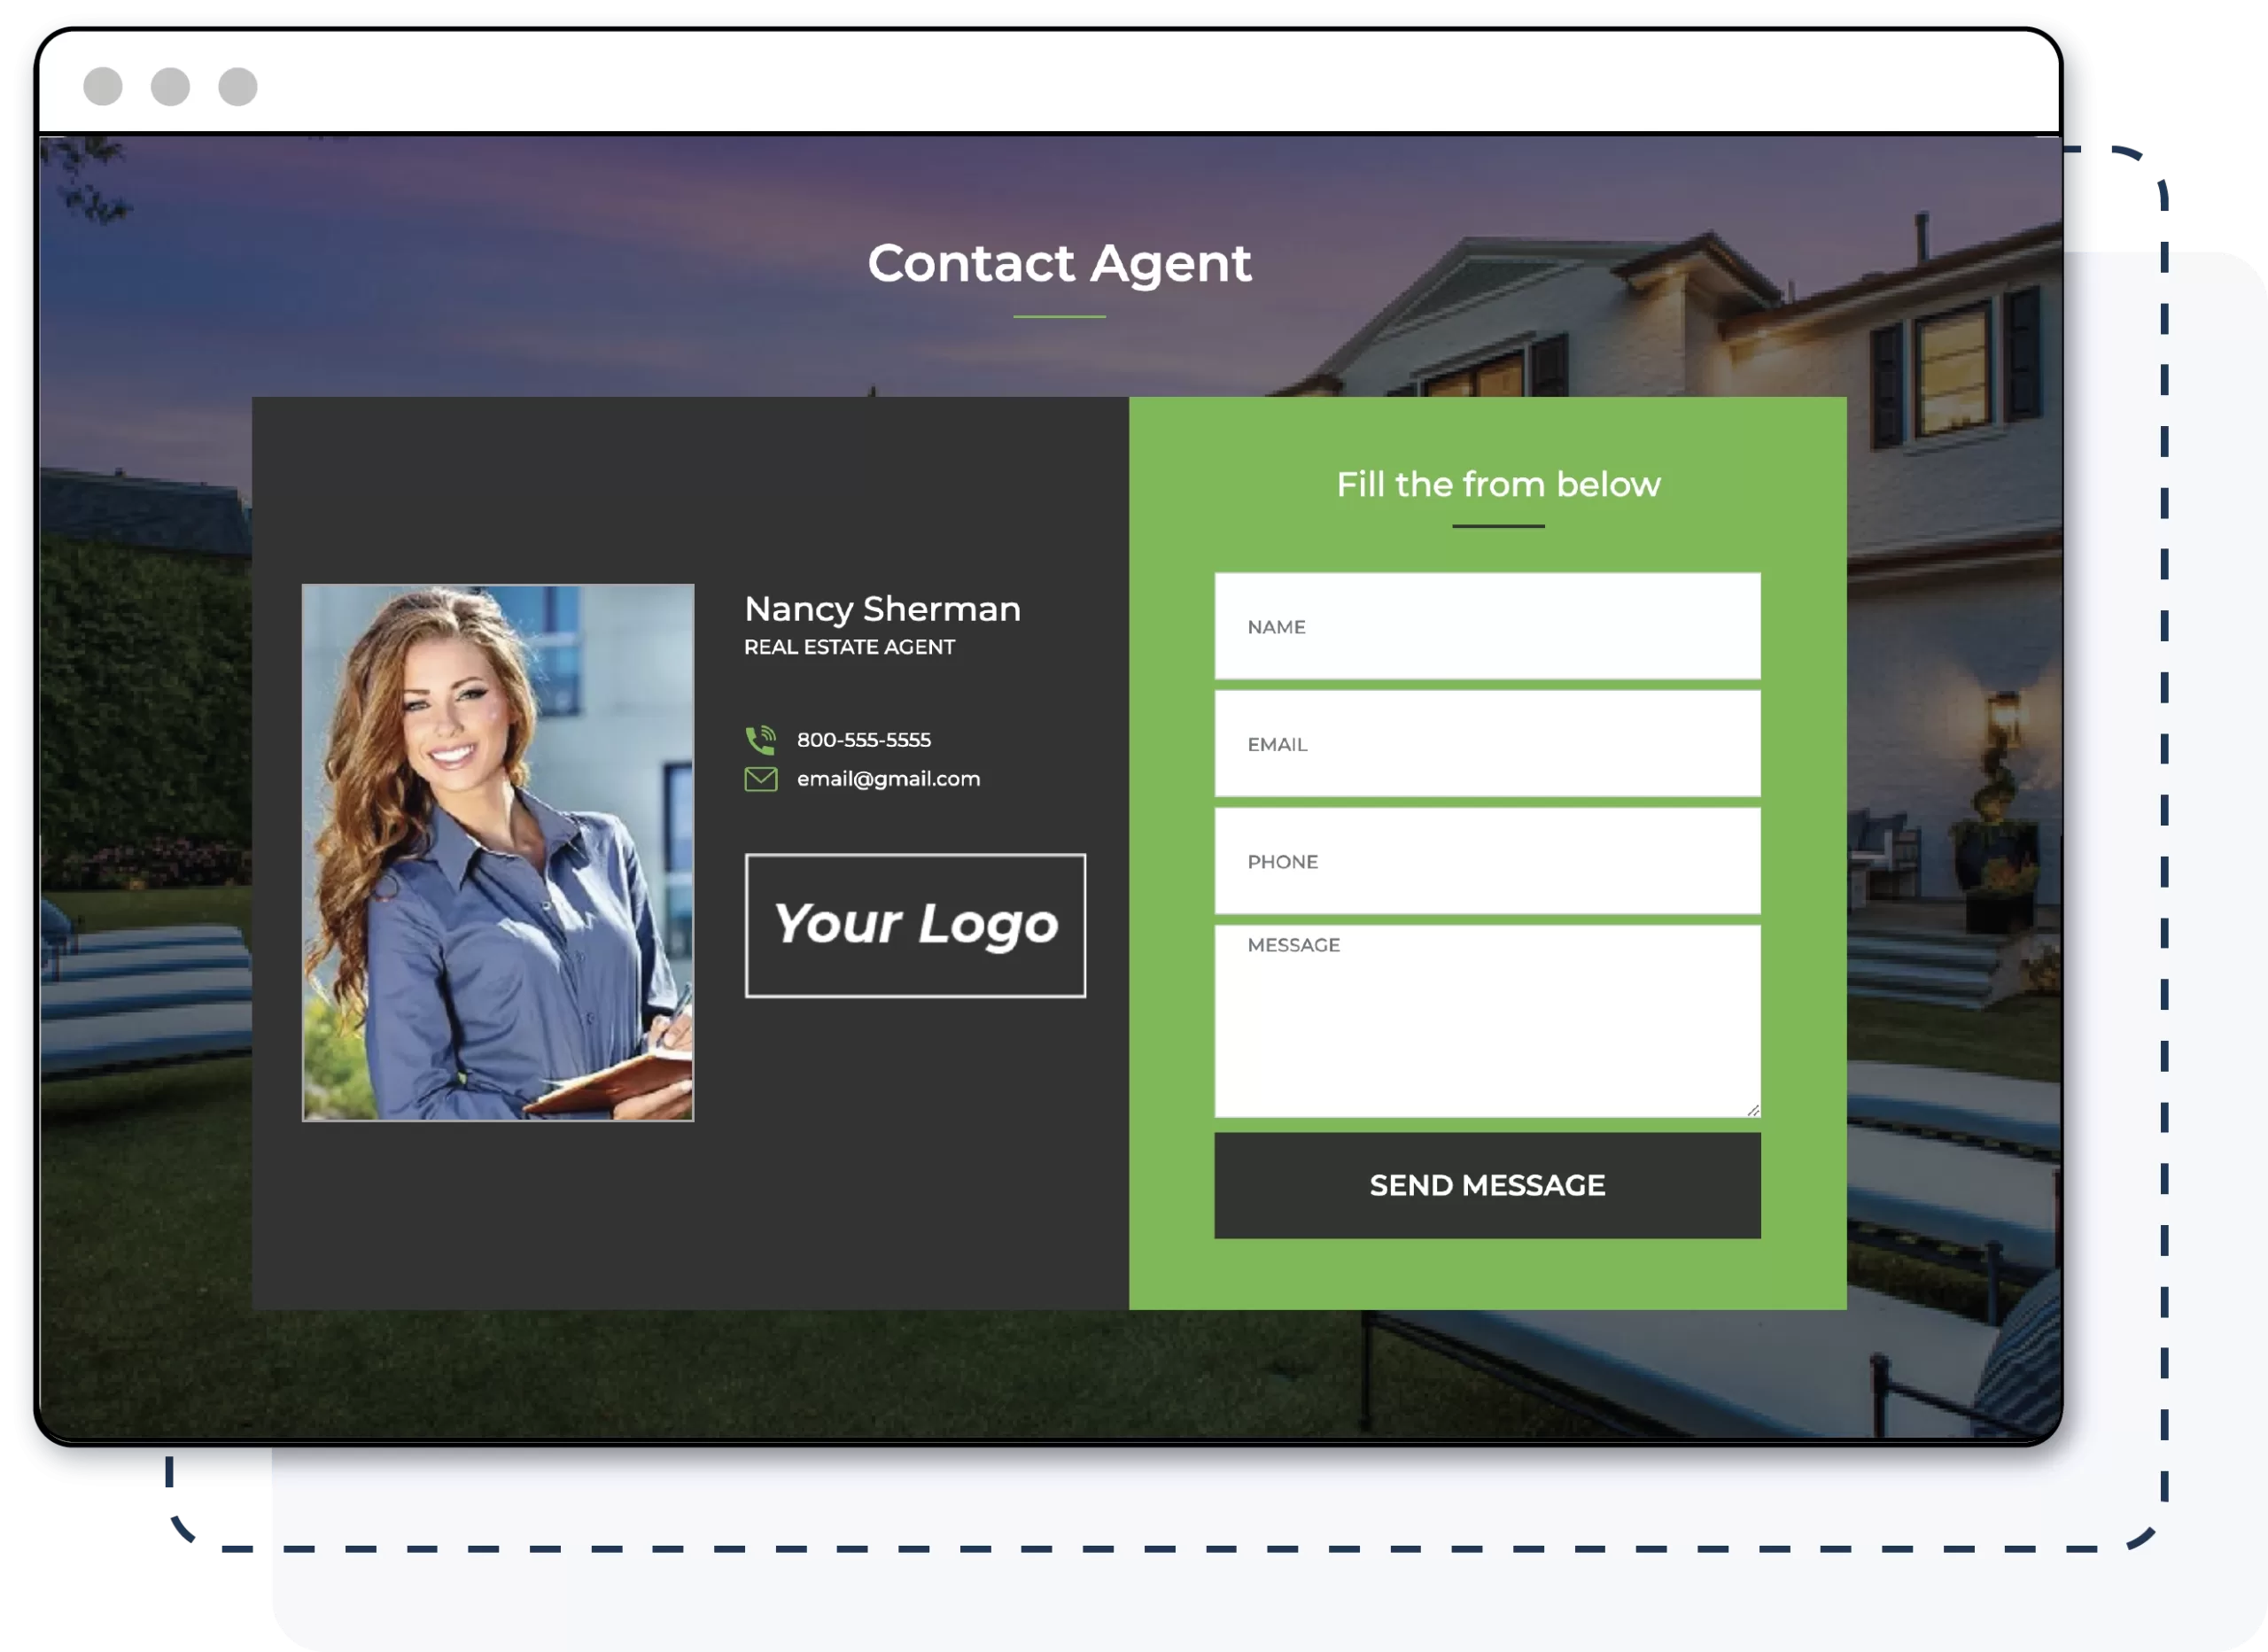 generate leads from single property website